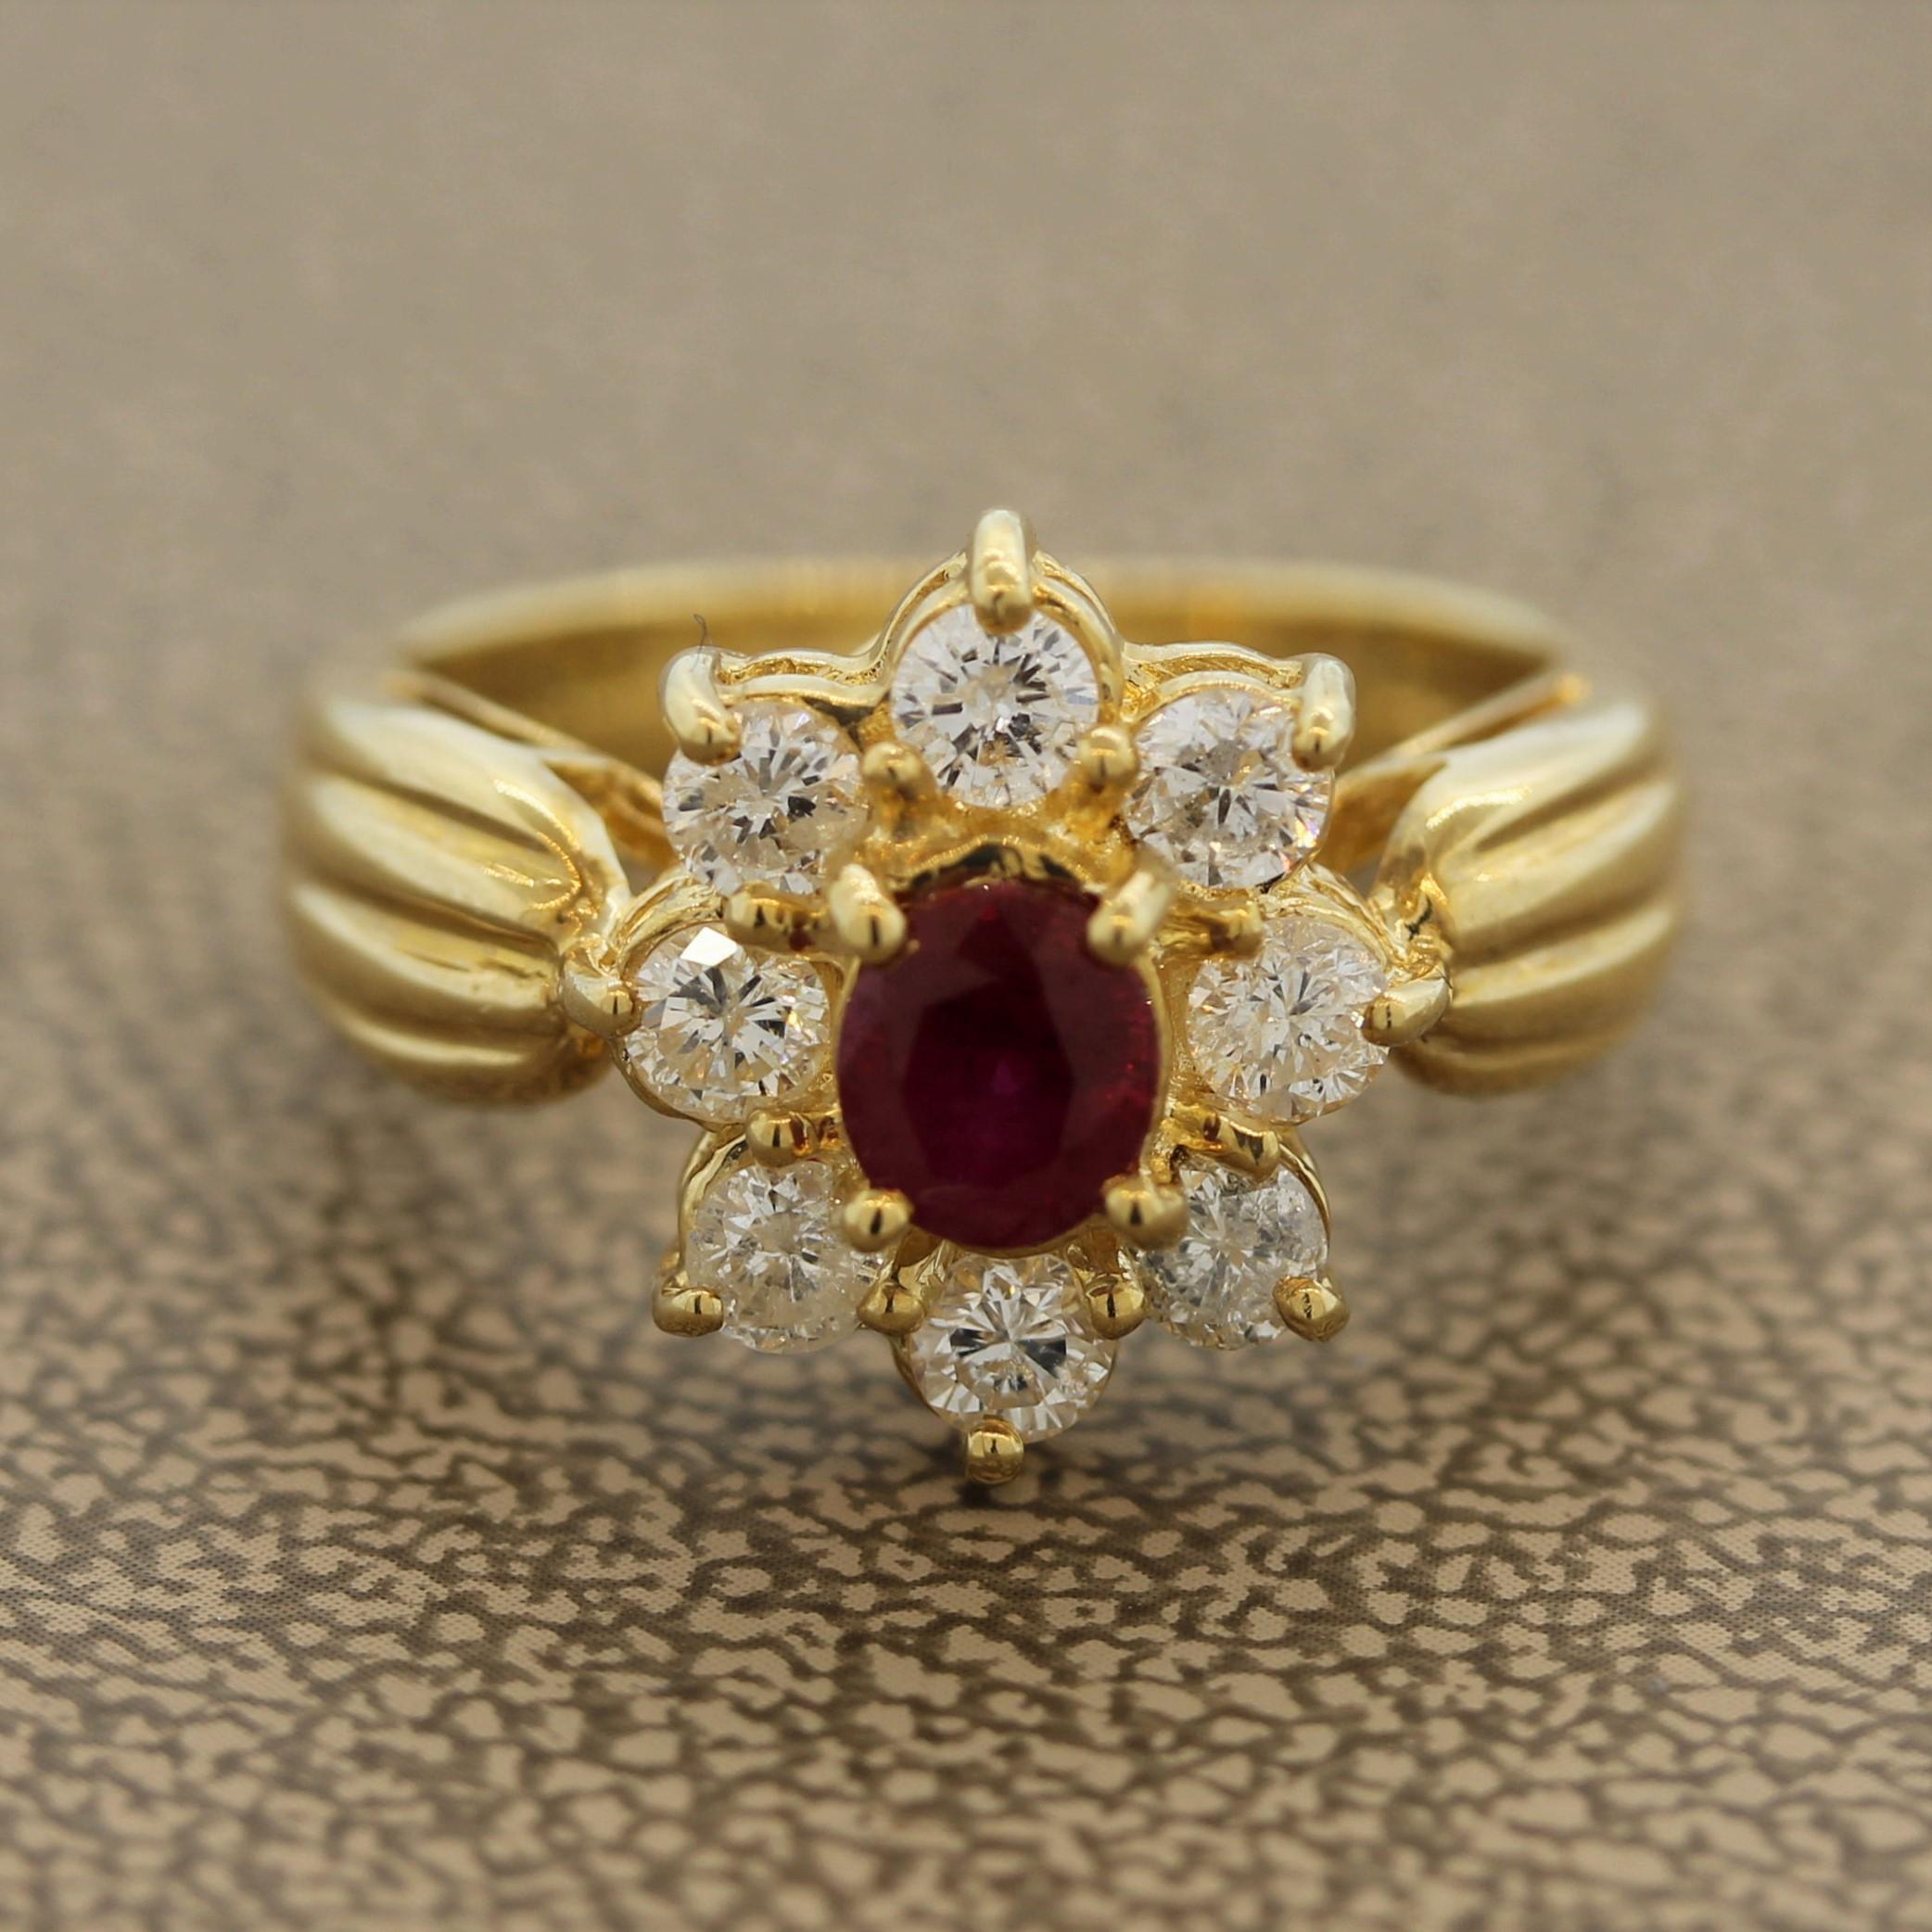 A simple yet elegant ring featuring a 0.65 carat oval shaped ruby. The ruby has a beautiful vivid red color and is haloed by 0.85 carats of round brilliant cut diamonds which makes a flower design. Made in 18k yellow gold.

Ring Size 5.75